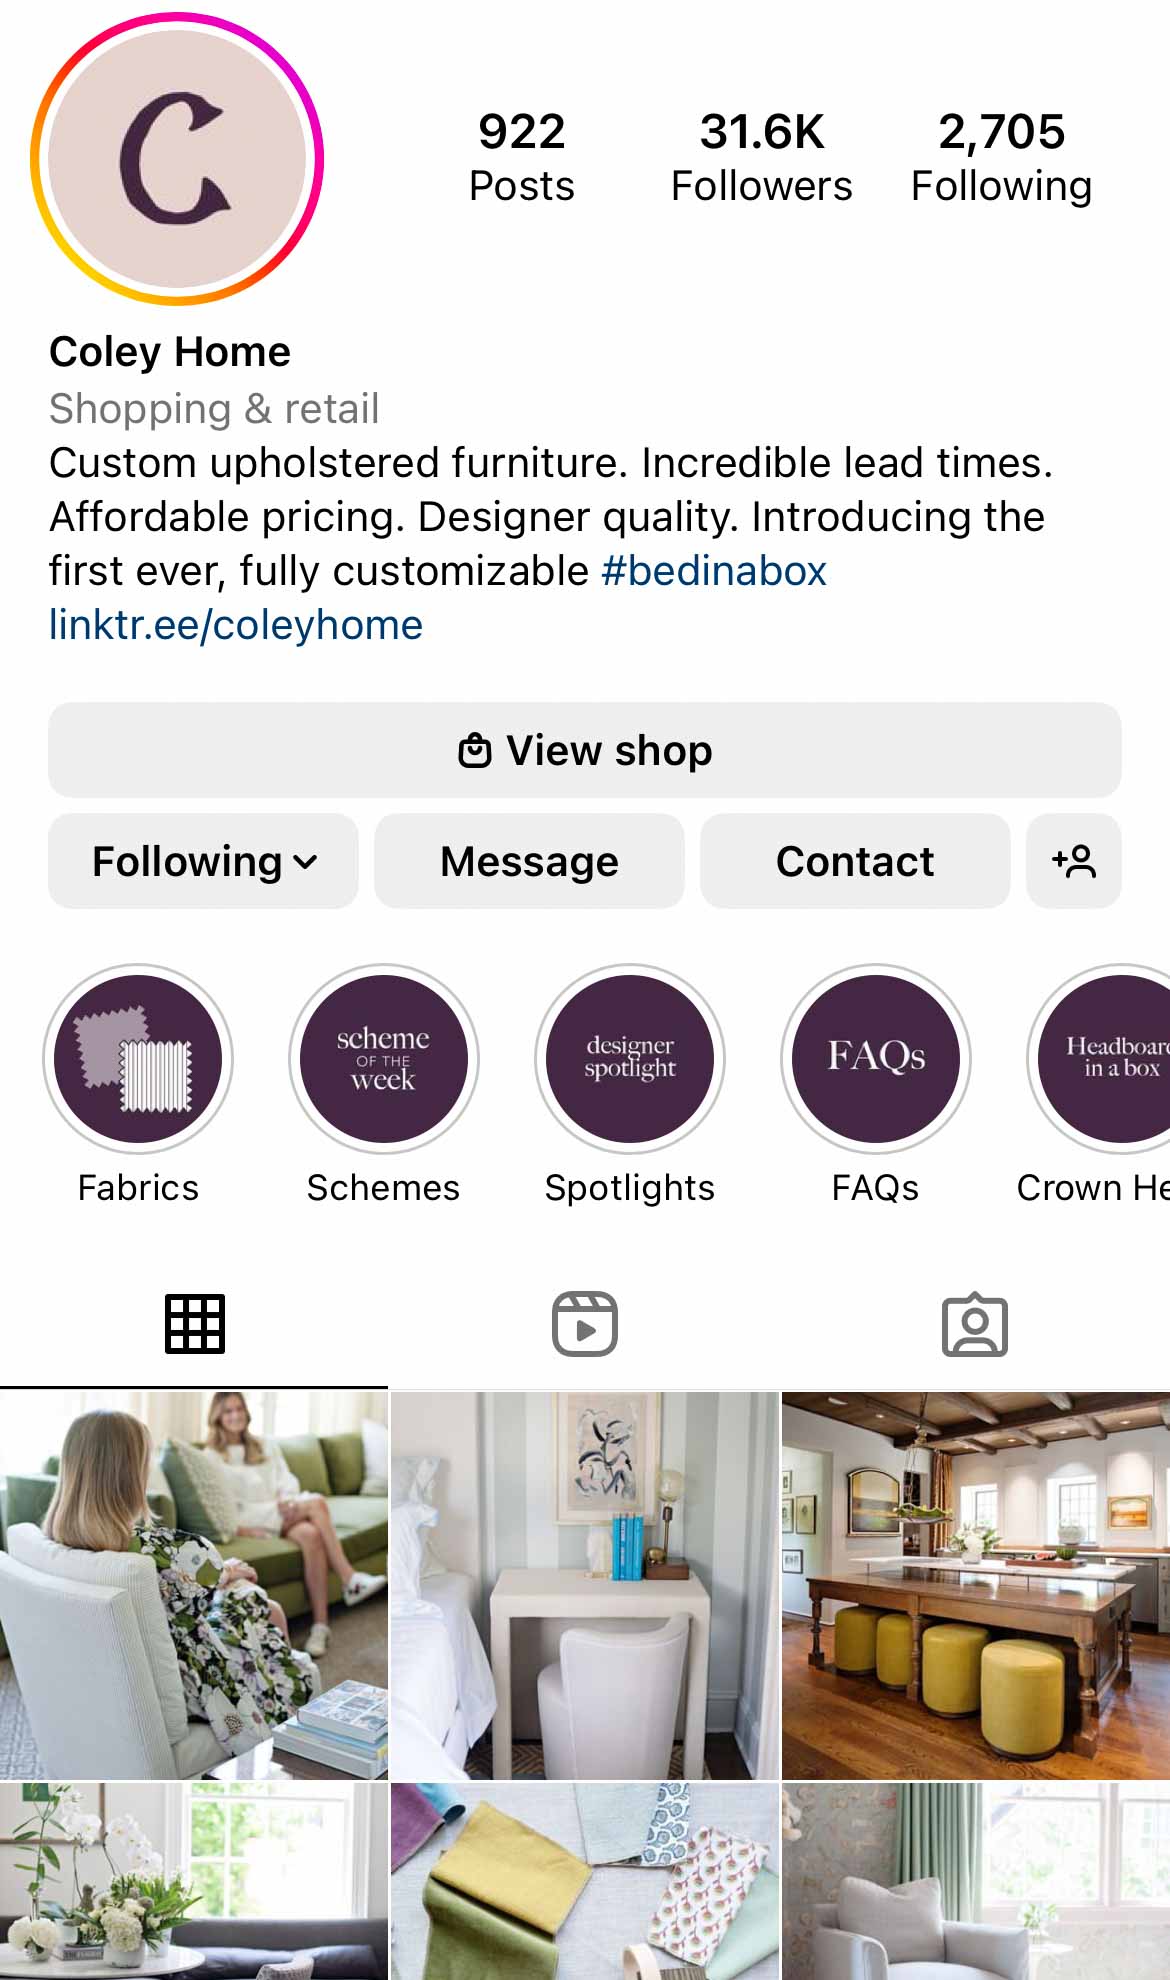 Coley Home Instagram page